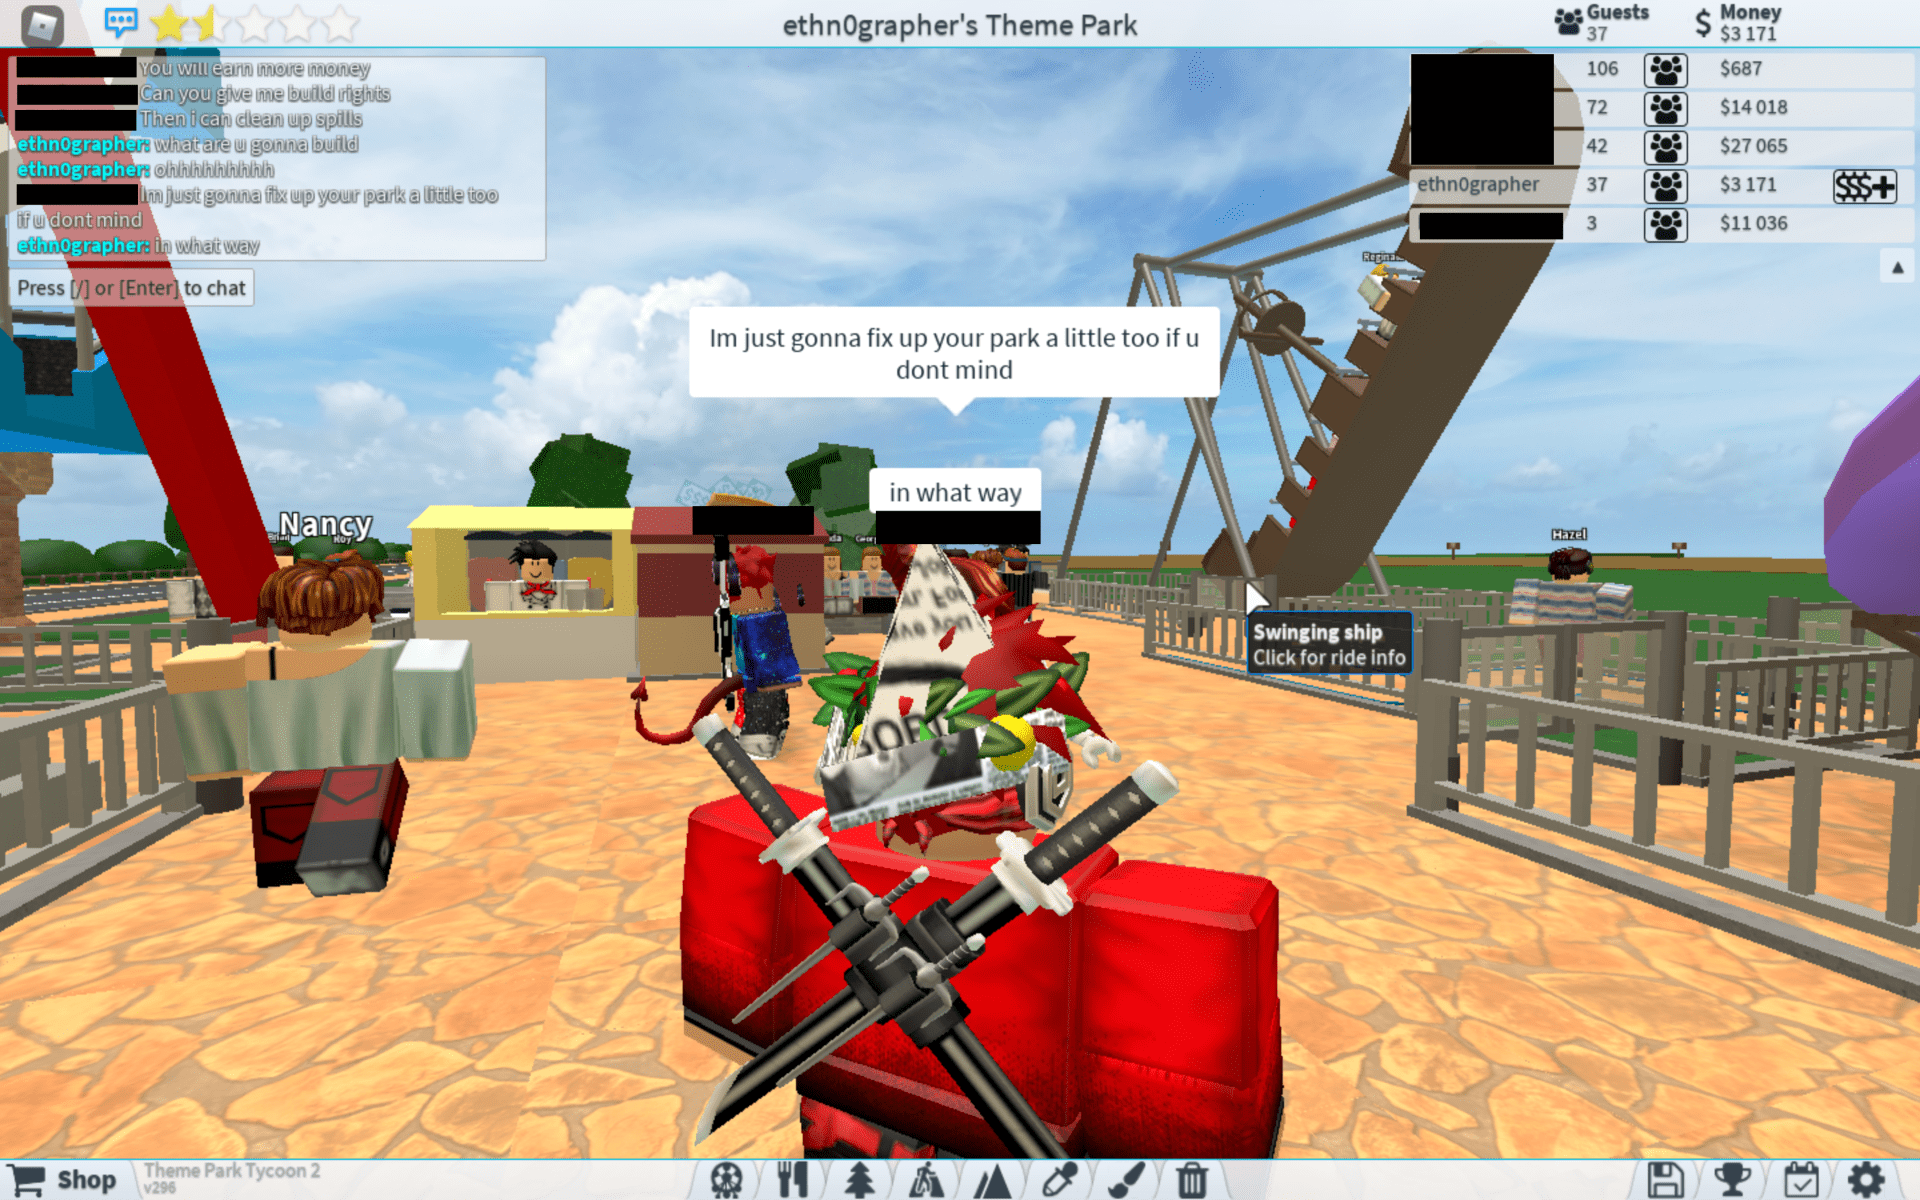 Friendship And Care In Roblox Virtual Ethnographic Methods Class Research Portfolio - making my own theme park in roblox